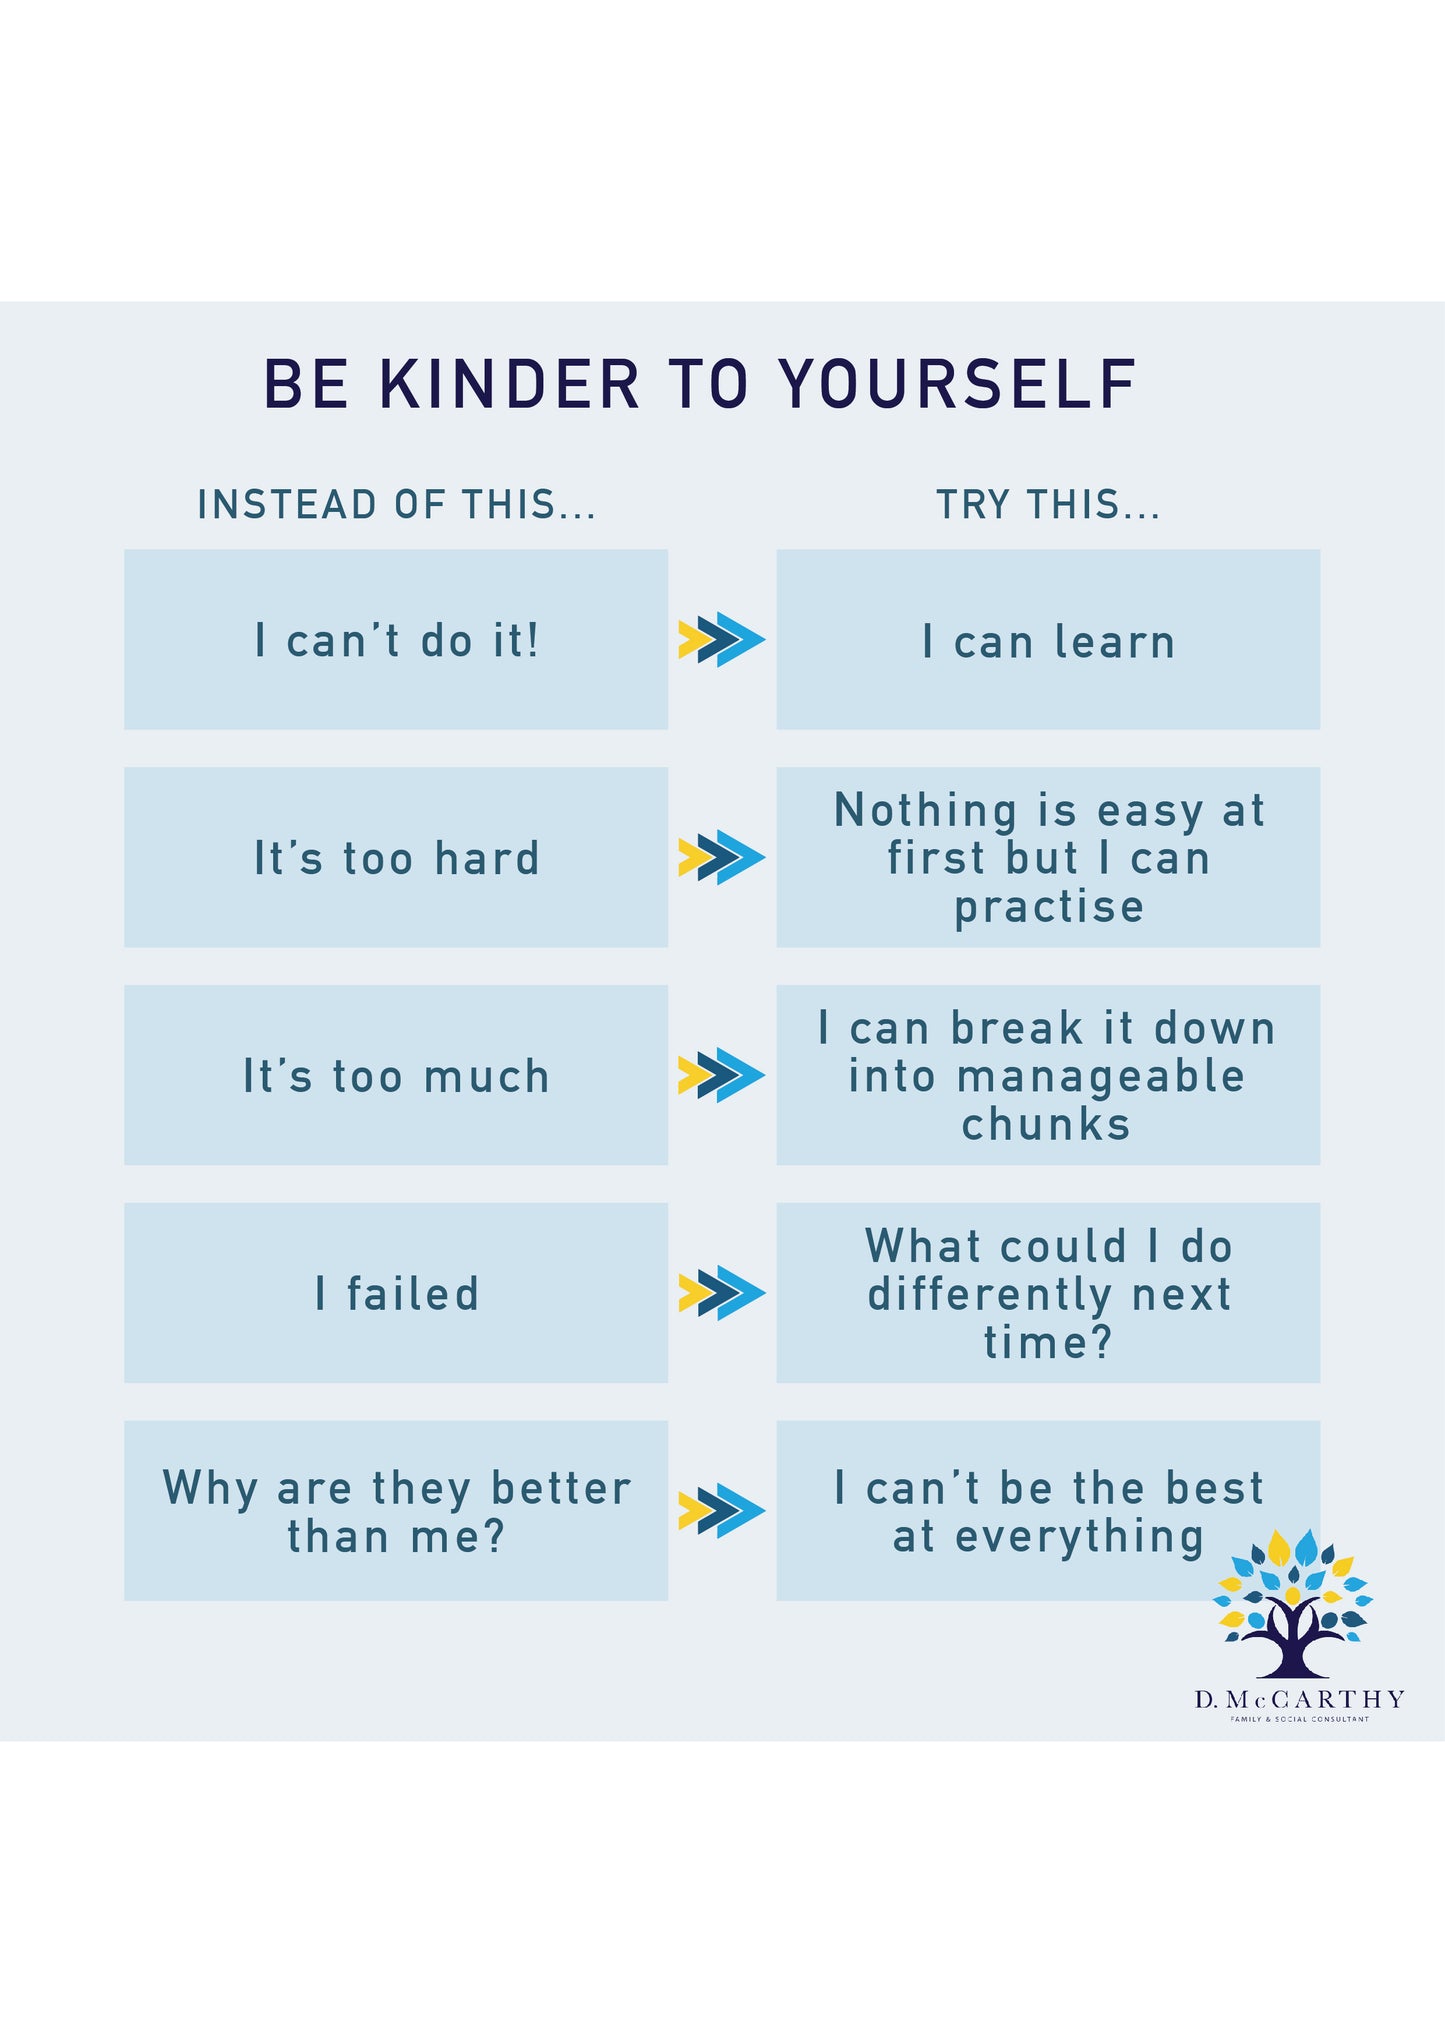 Be kinder to your self - reframe